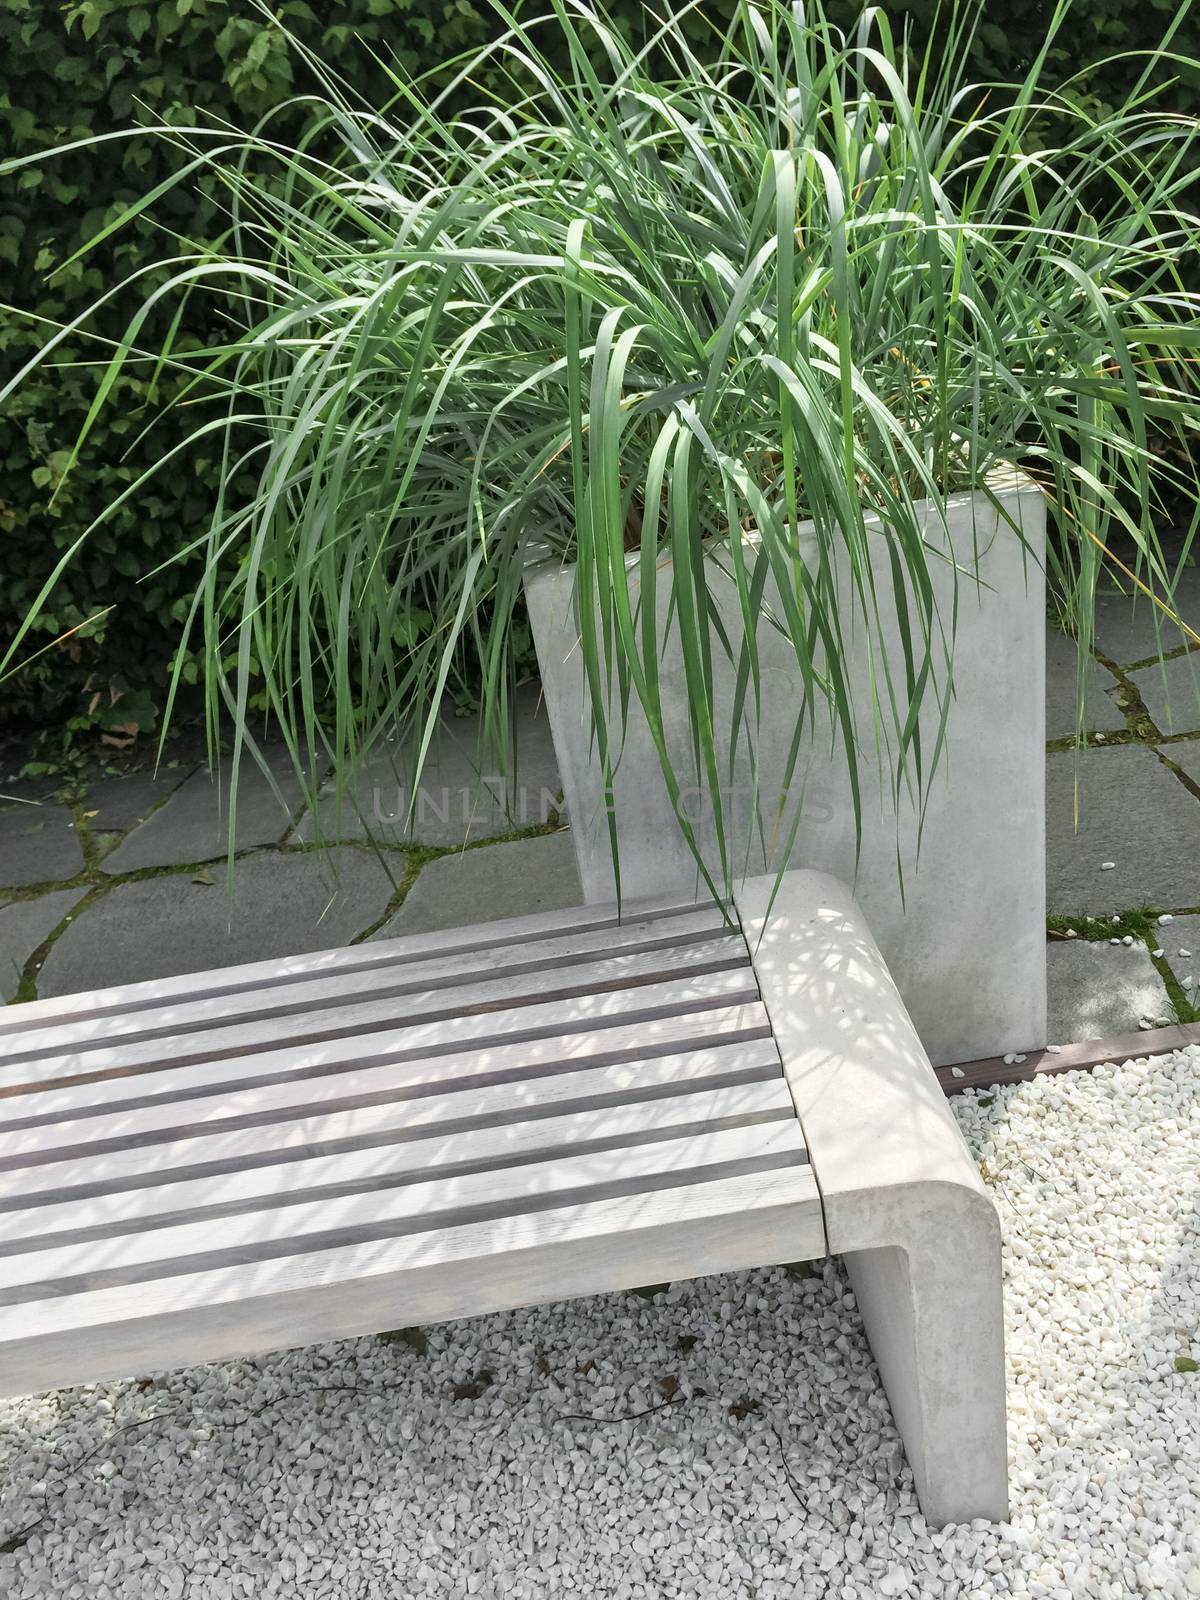 Detail of a garden with decorative grass and bench. Contemporary design.